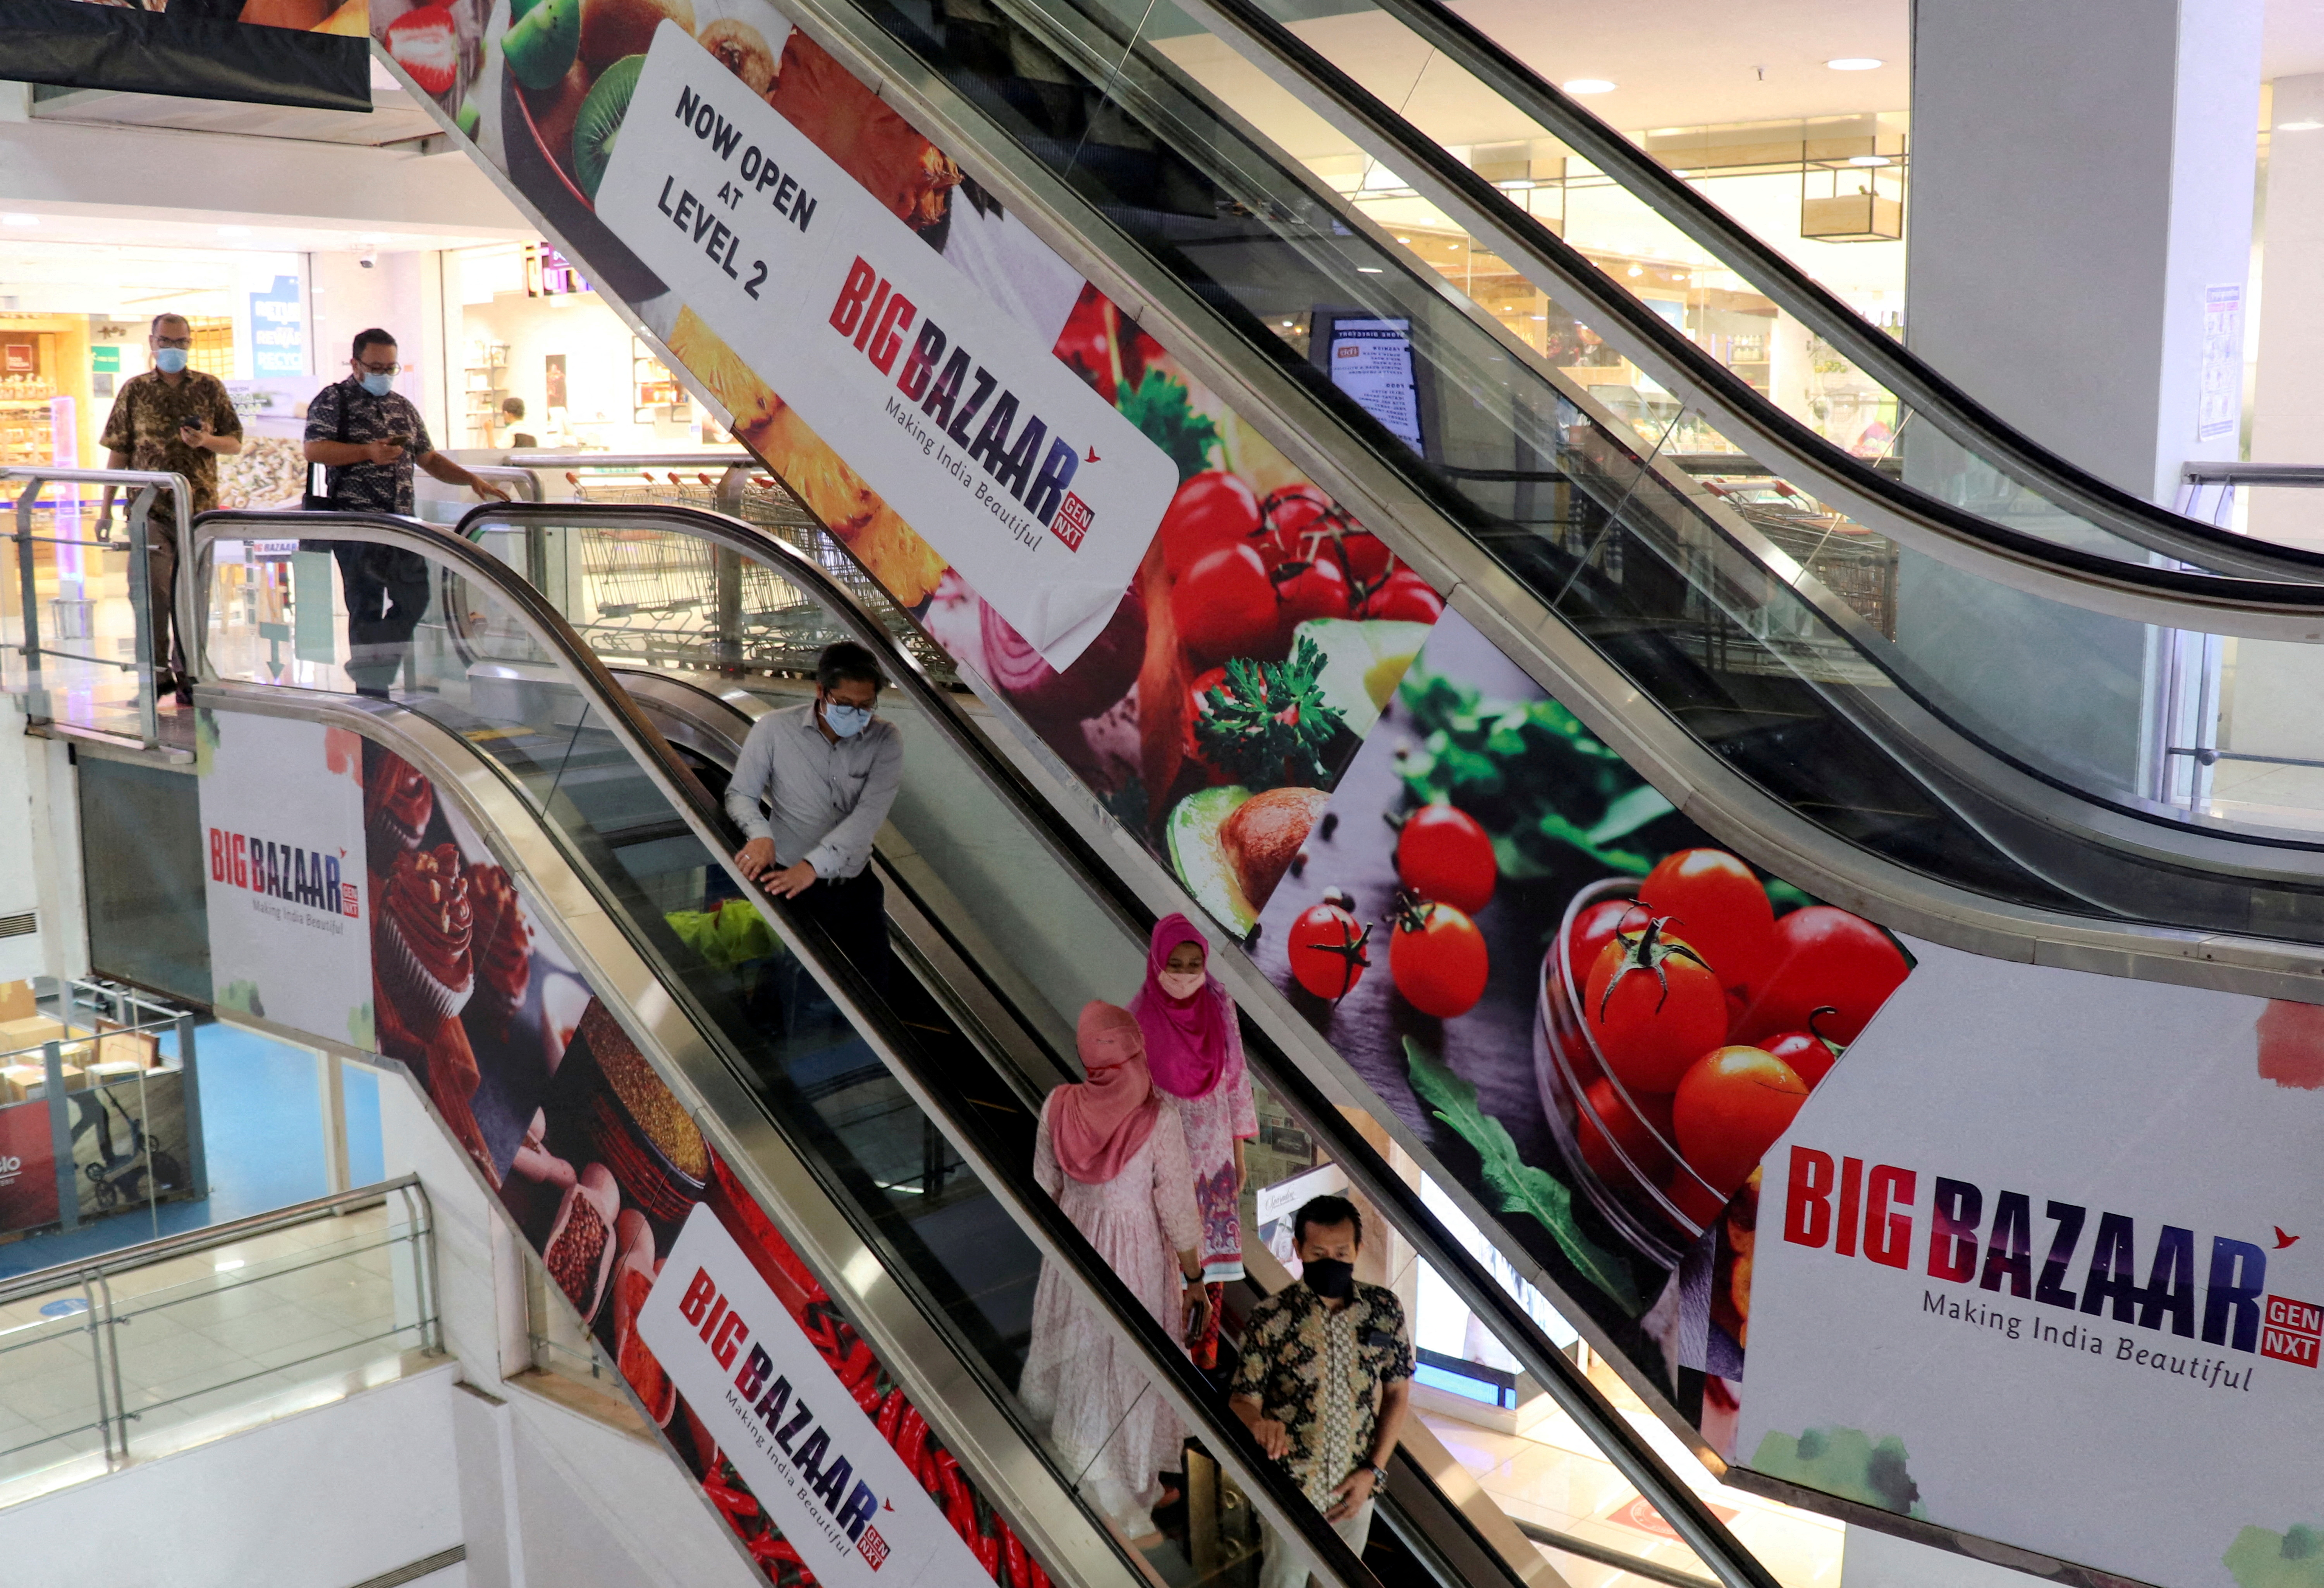 People use an escalator as they exit a Future Group Big Bazaar retail store in Mumbai